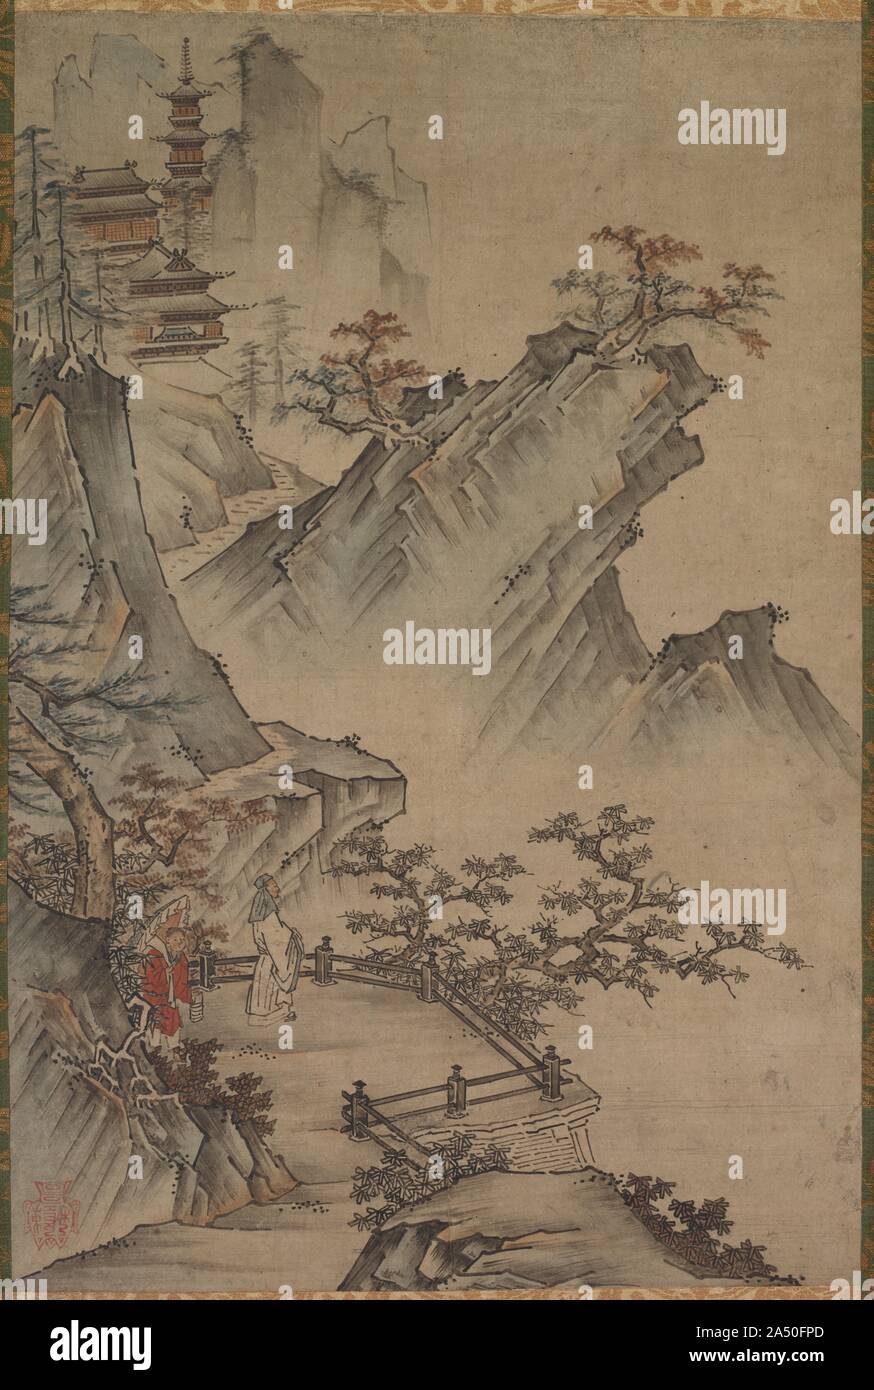 Chinese Literatus Viewing a Valley, possibly mid- to late 1500s-1600s. This painting depicts a well-recognized scene in East Asian painting most often associated with the Chinese Southern Song dynasty painter Ma Yuan: a figure, most likely a retired government official, contemplating a high mountain valley from a scenic overlook. The lower left corner of the painting has a tripod-shaped seal resembling that of Kano Hideyori. The work appears to have either been made or repurposed to hang as a pair with a painting by Hideyori. Stock Photo